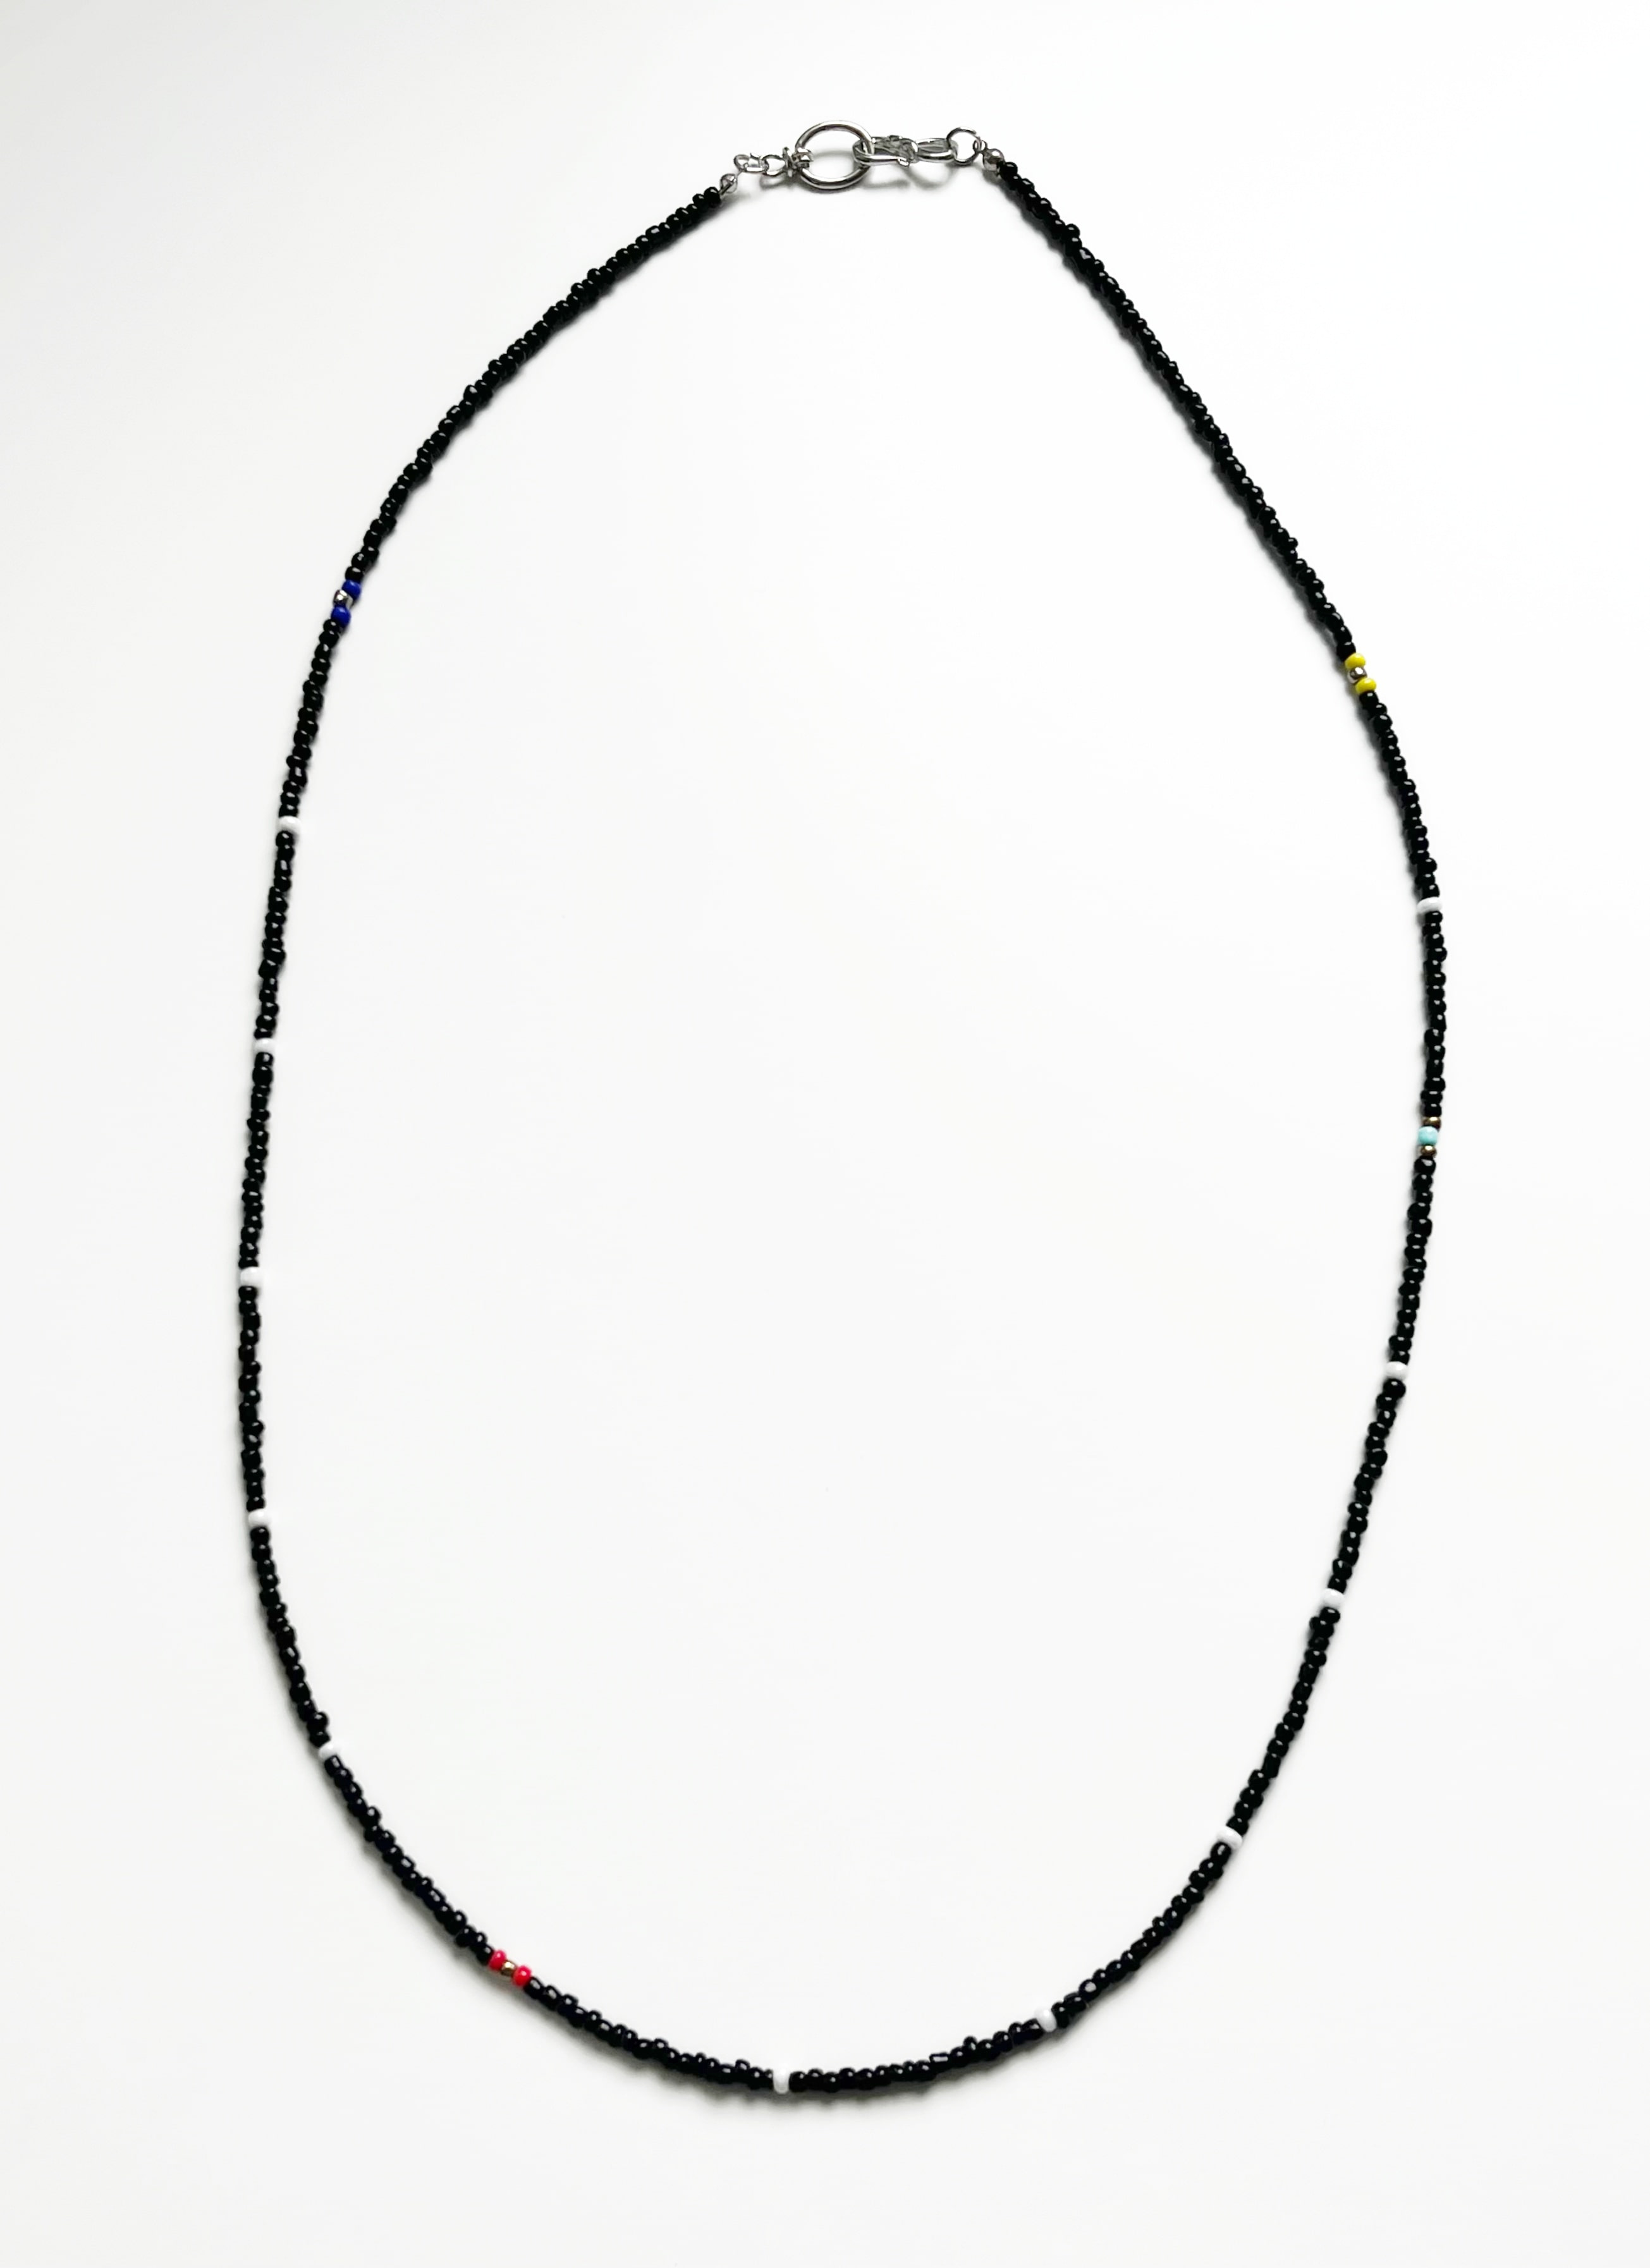 lluvia beads necklace